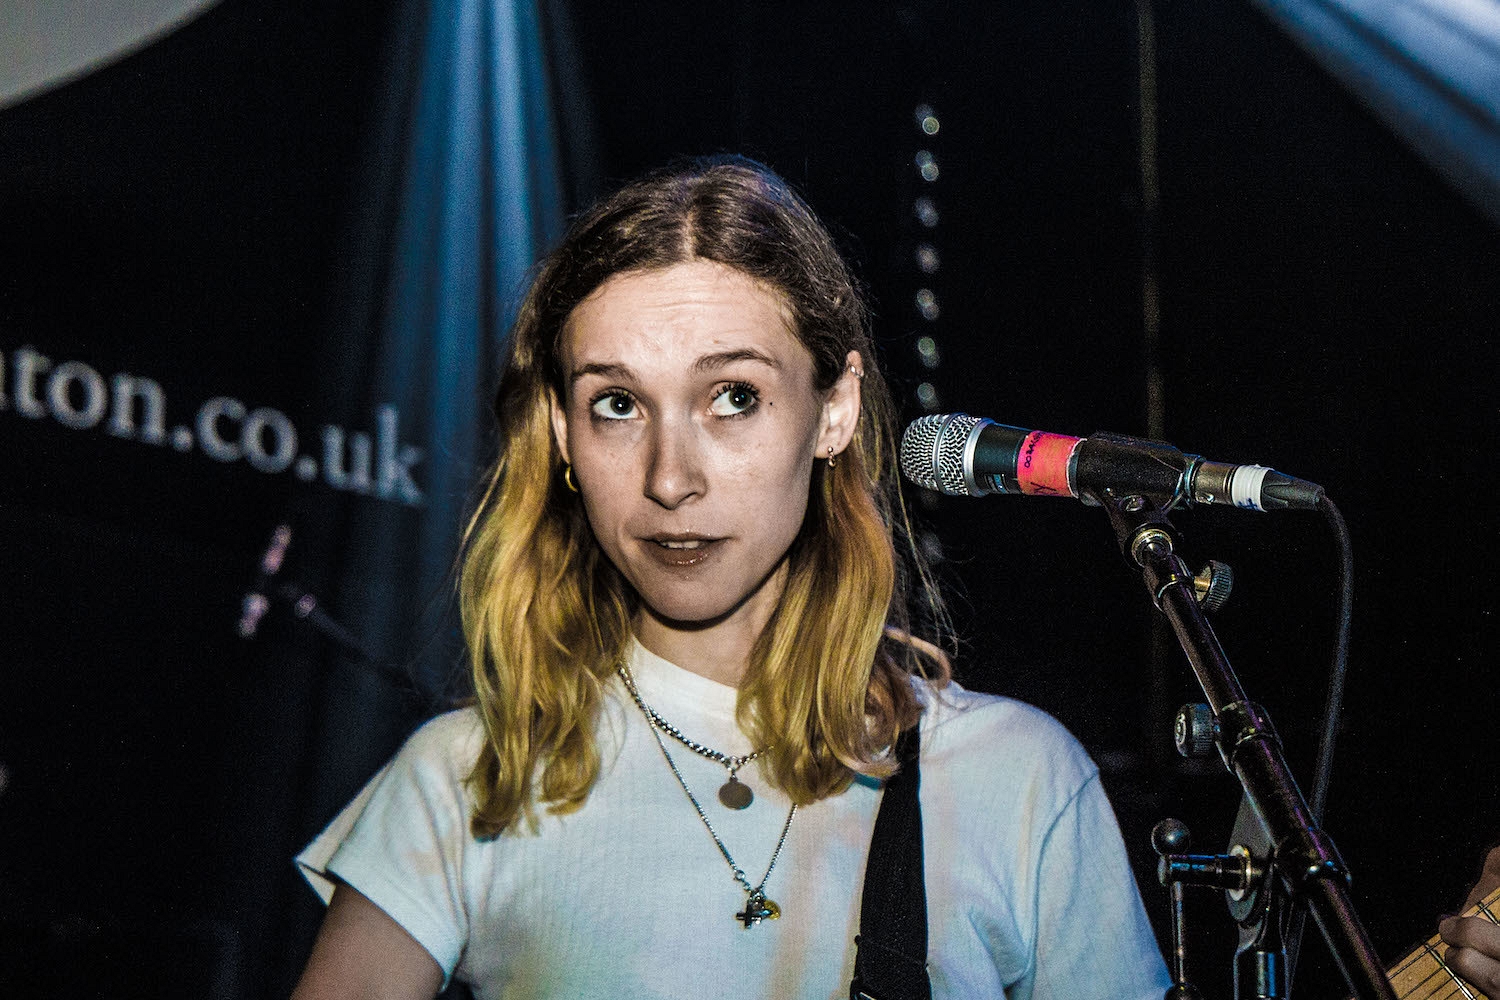 Phoebe Bridgers, Bodega, Gengahr and more shine on a jam-packed second day at The Great Escape 2018